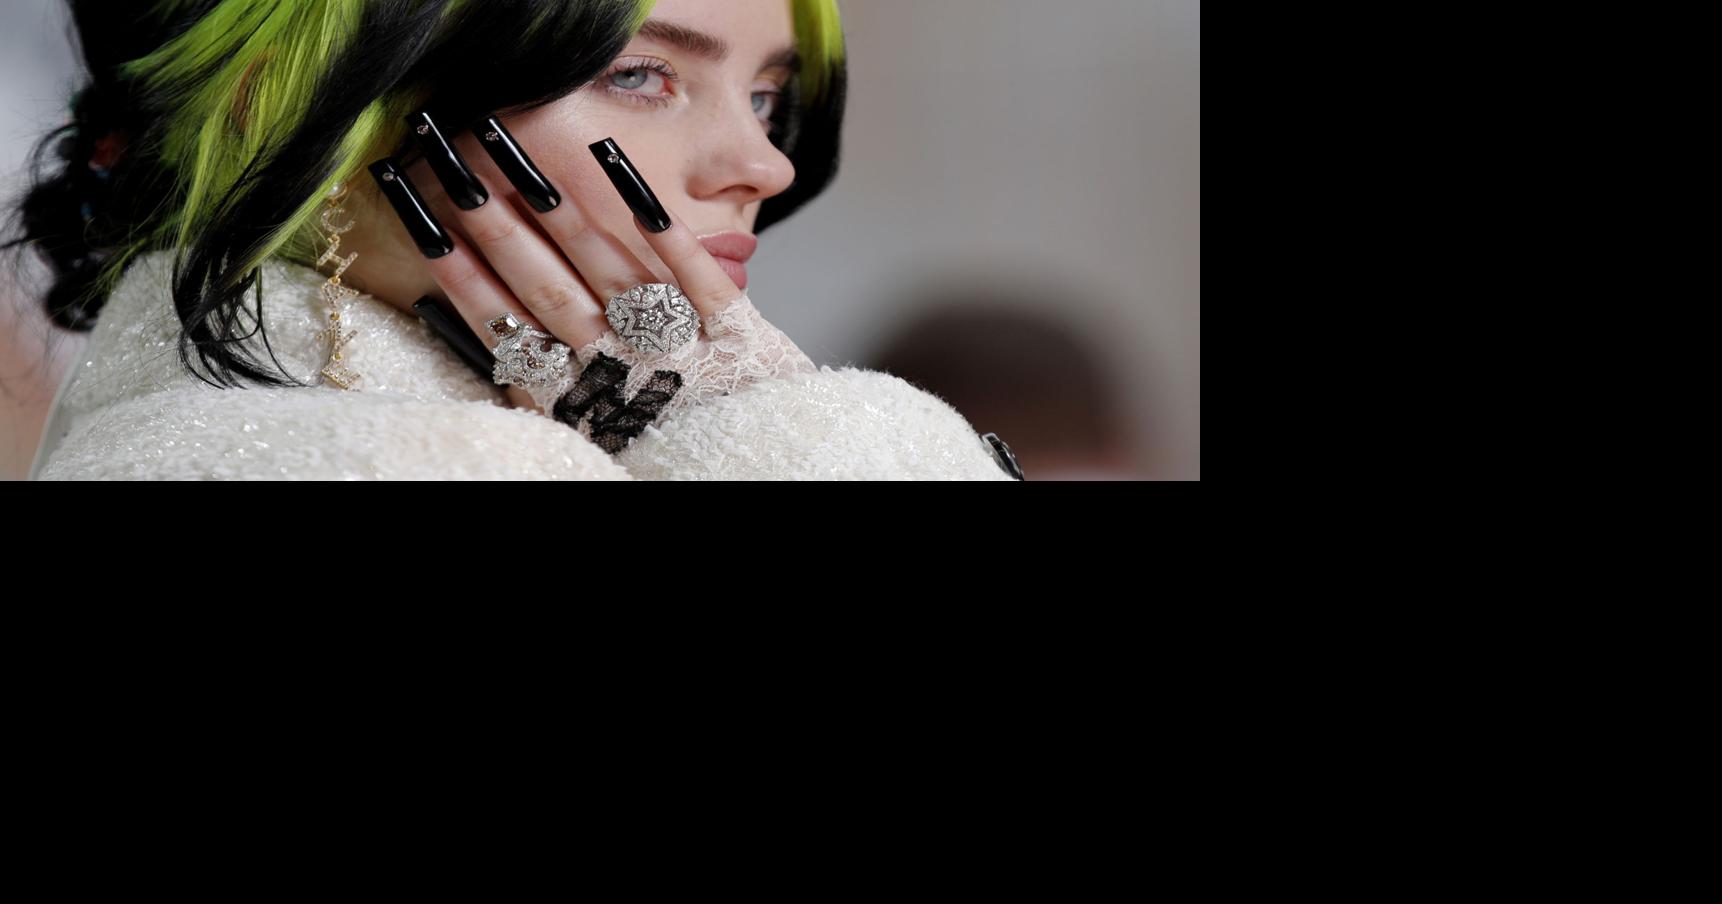 Billie Eilish is her extreme close-up in new documentary | Daily | yoursun.com